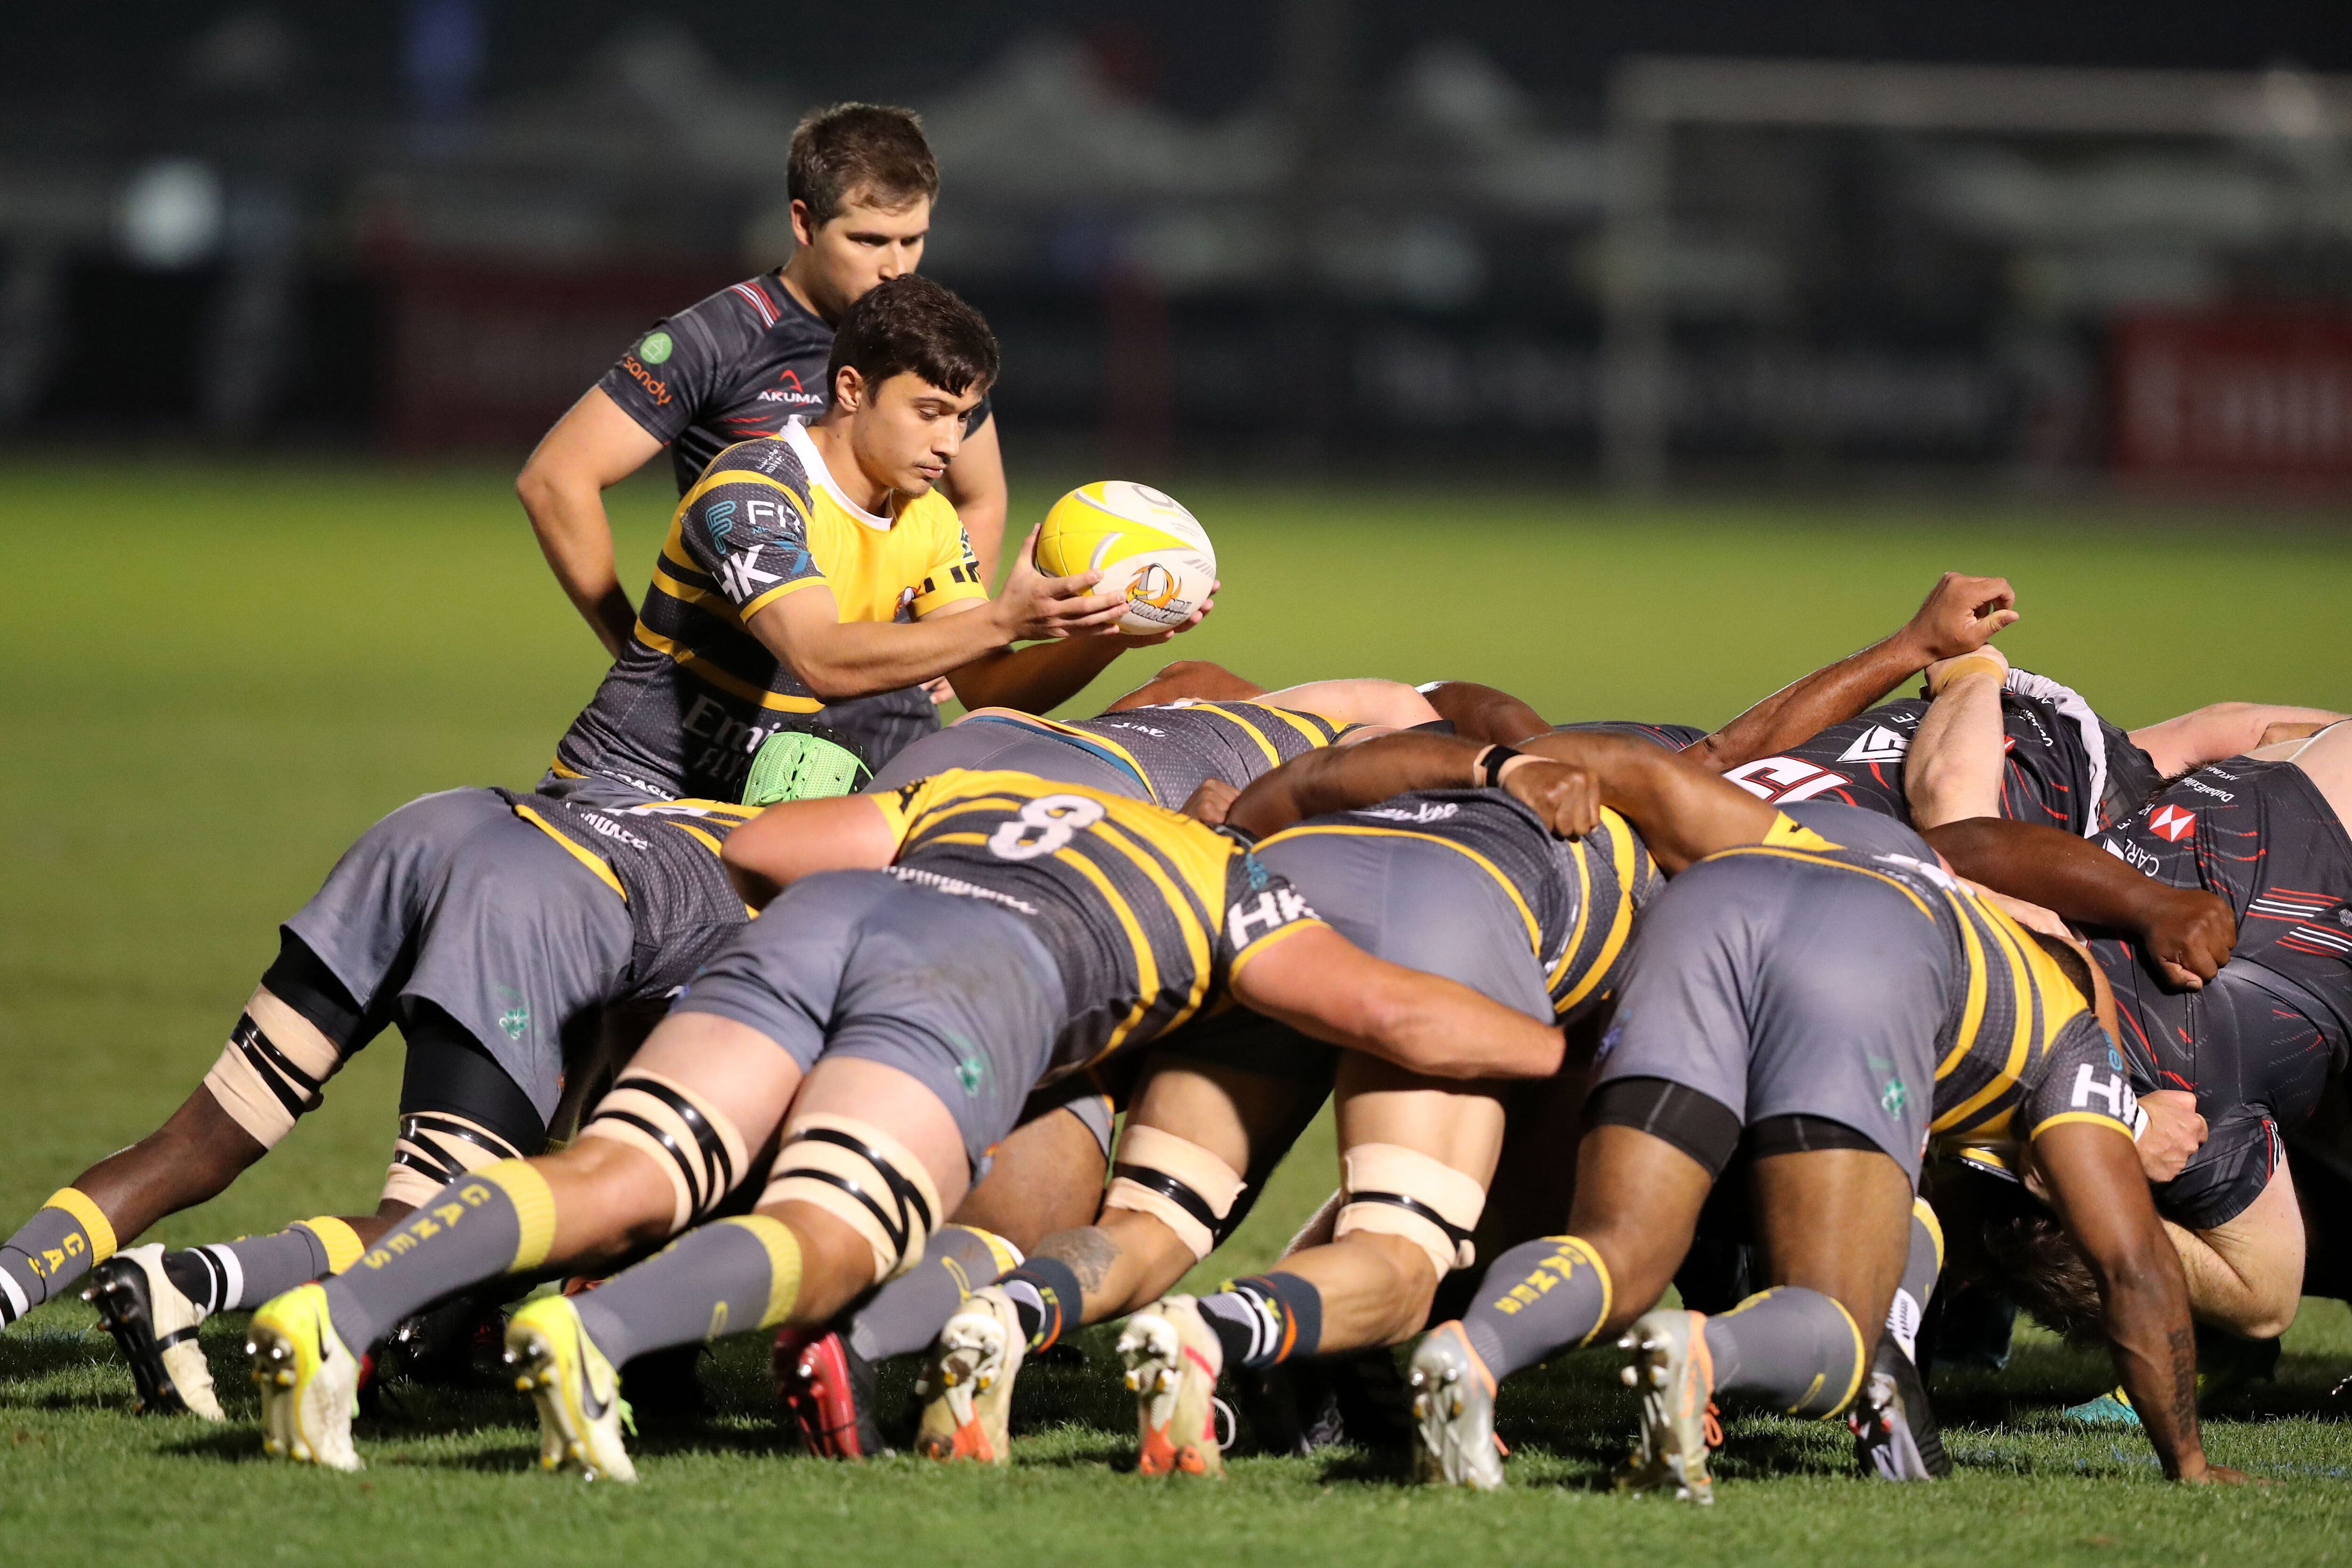 hurricanes v dragons: sleeping giants of uae rugby ready to contest premiership title